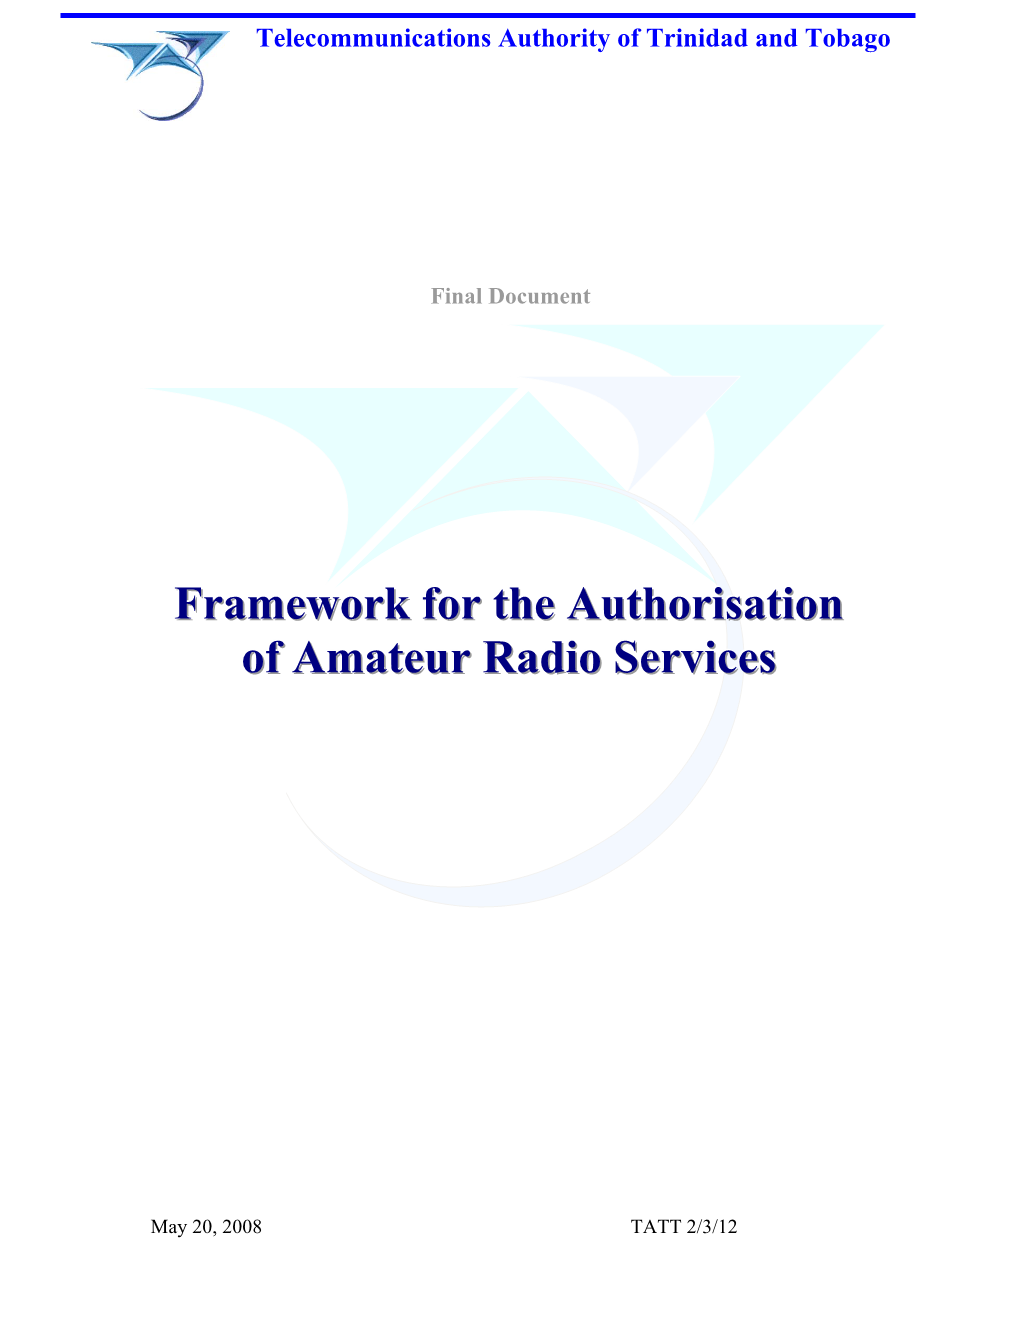 Framework for the Authorisation of Amateur Radio Services